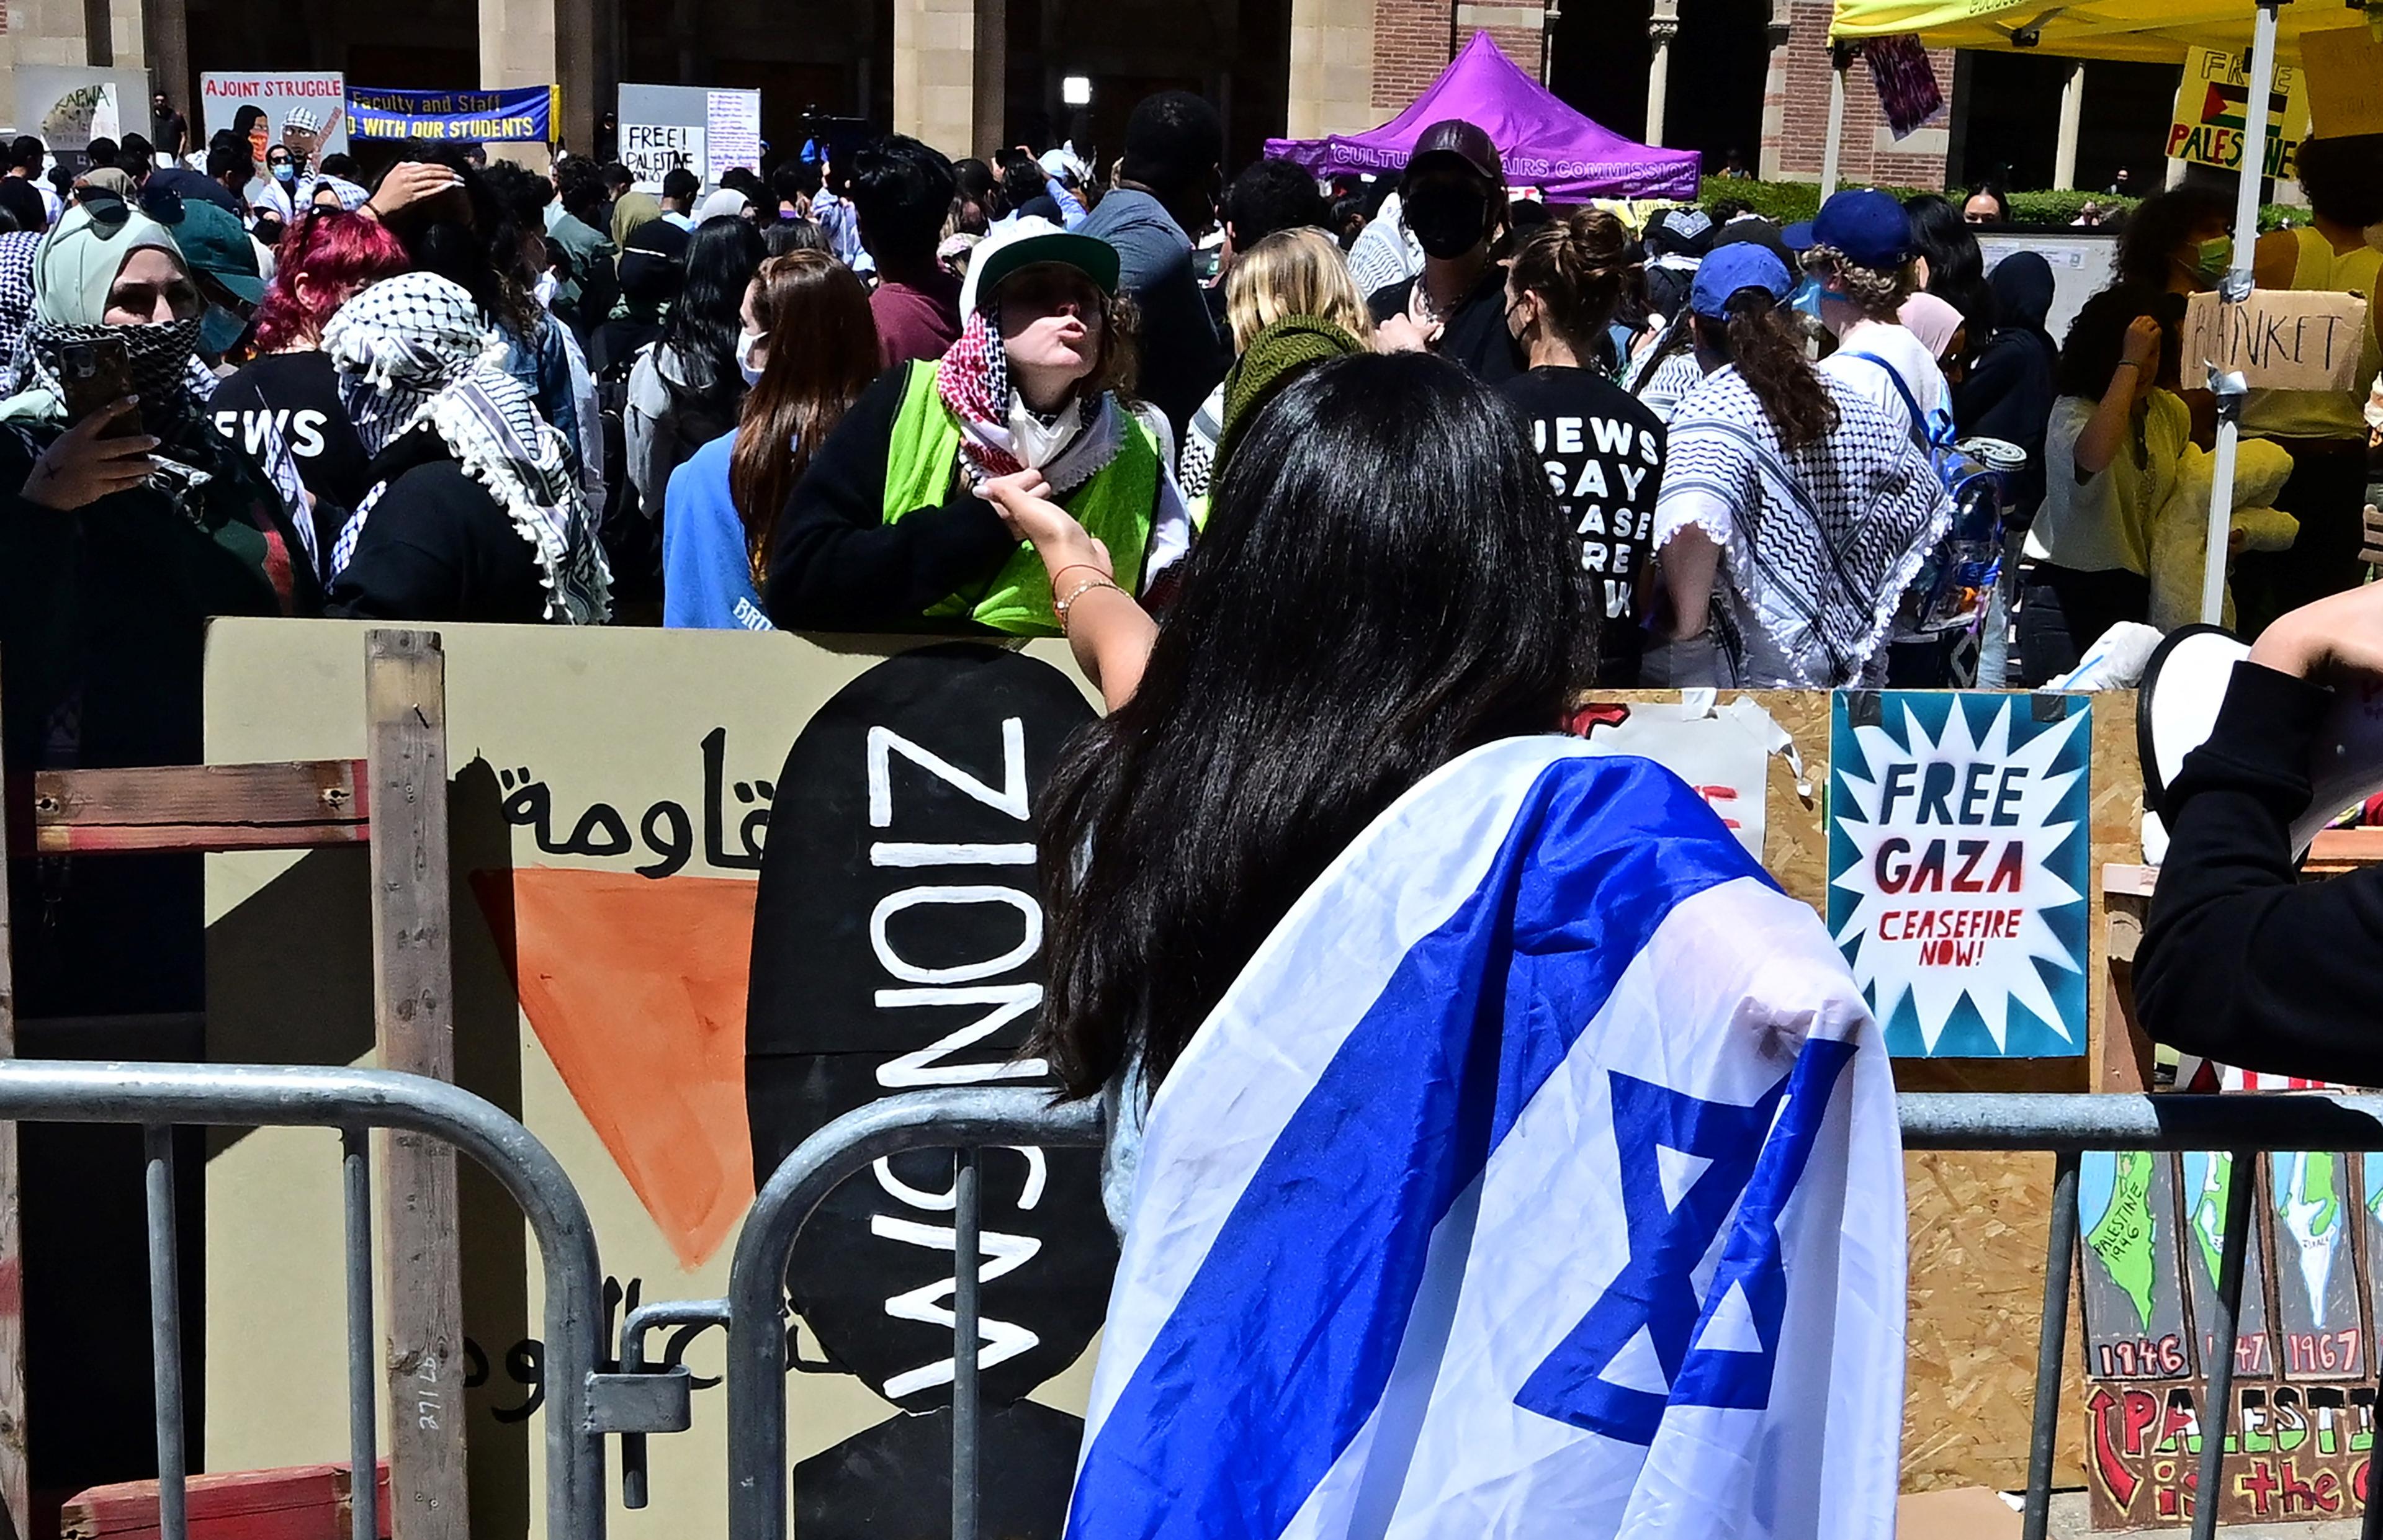 UCLA, USC Face Lawsuits by Jewish Student, Faculty Member After Protests